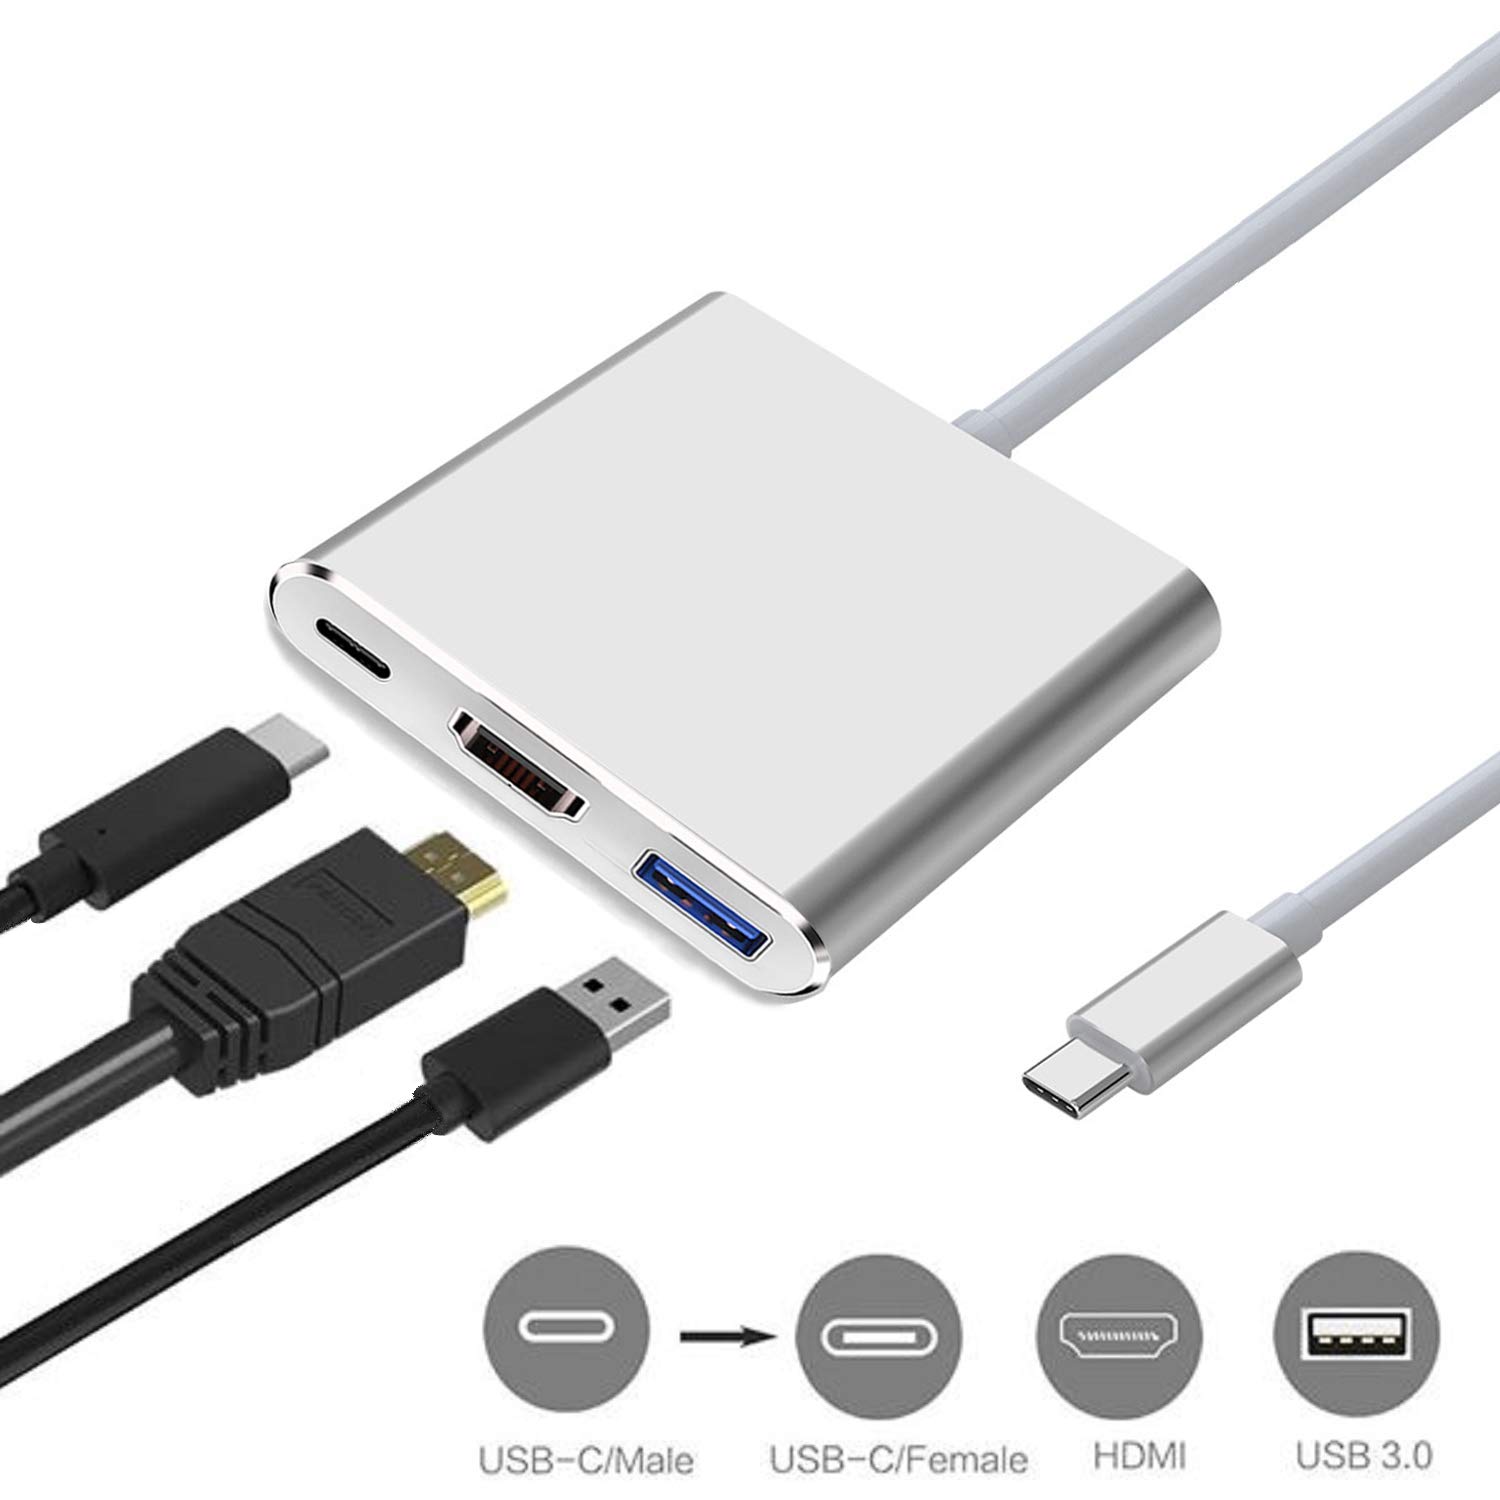 USB-C to HDMI Adapter (Supports 4K / 30Hz) - Type- C 3 in 1 Converter Cable for 2017/2018 MacBook Pro, MacBook, Mac Pro, iMac, Chromebook, & More USB 3.0 Type-C Devices